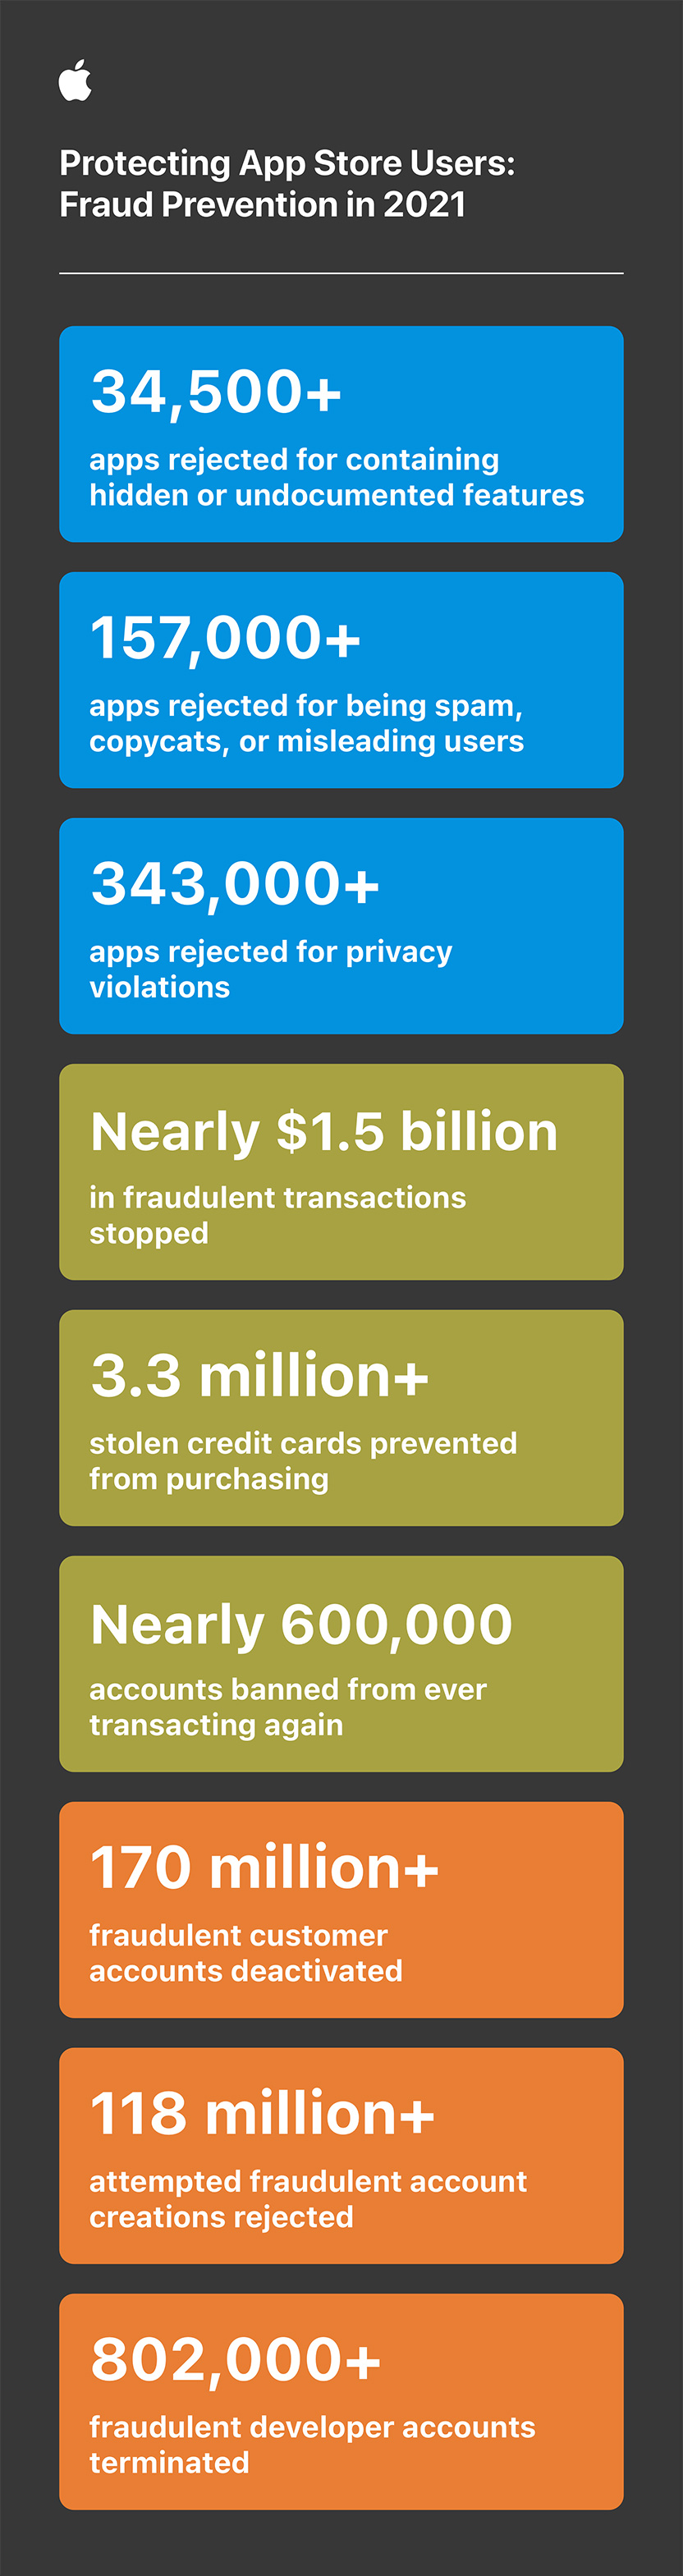 App Store stopped nearly $1.5 billion in fraudulent transactions 